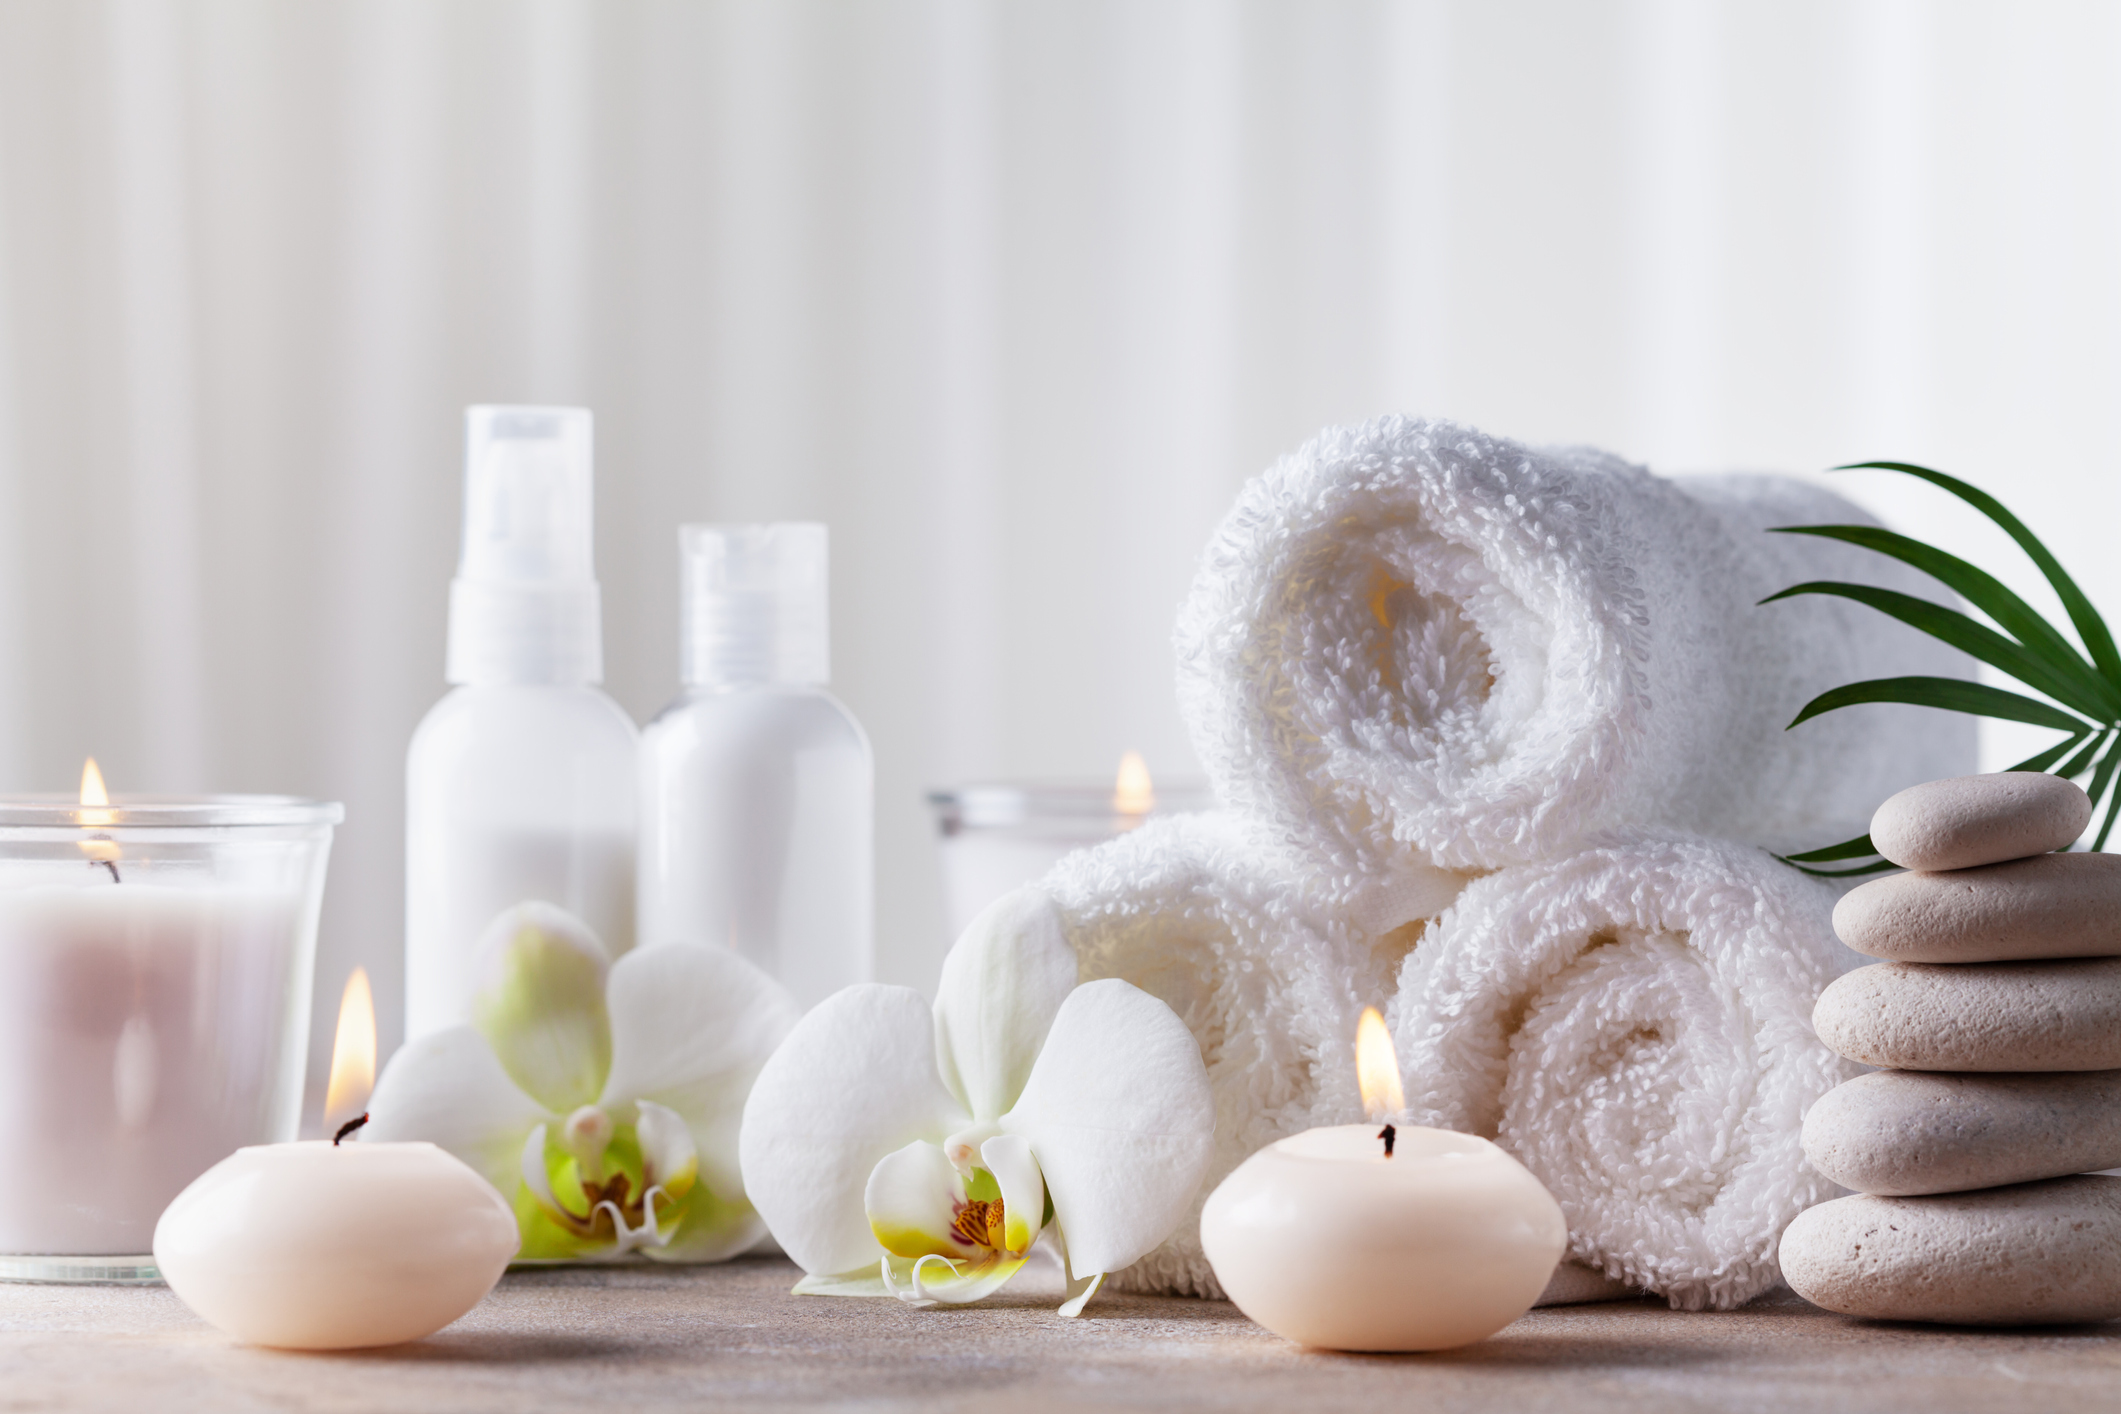 Experience a Relaxing and Rejuvenating Time at Healthy Beauty Spa ...